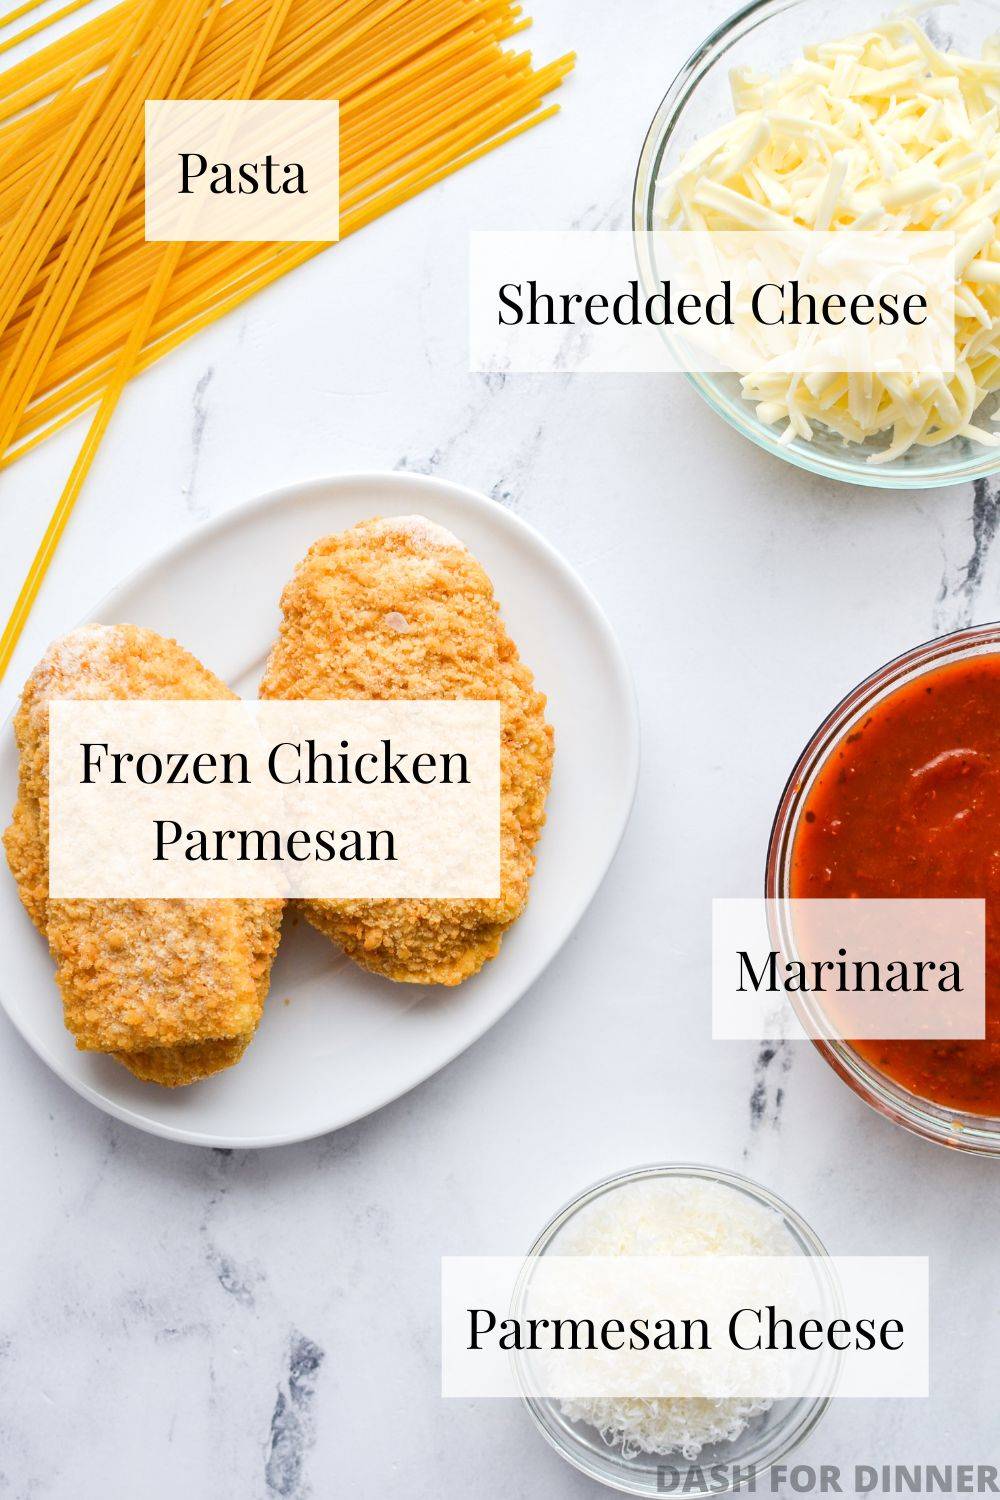 The ingredients needed to make frozen chicken parmesan - frozen chicken parmesan, pasta, shredded cheese, marinara, and parmesan cheese.